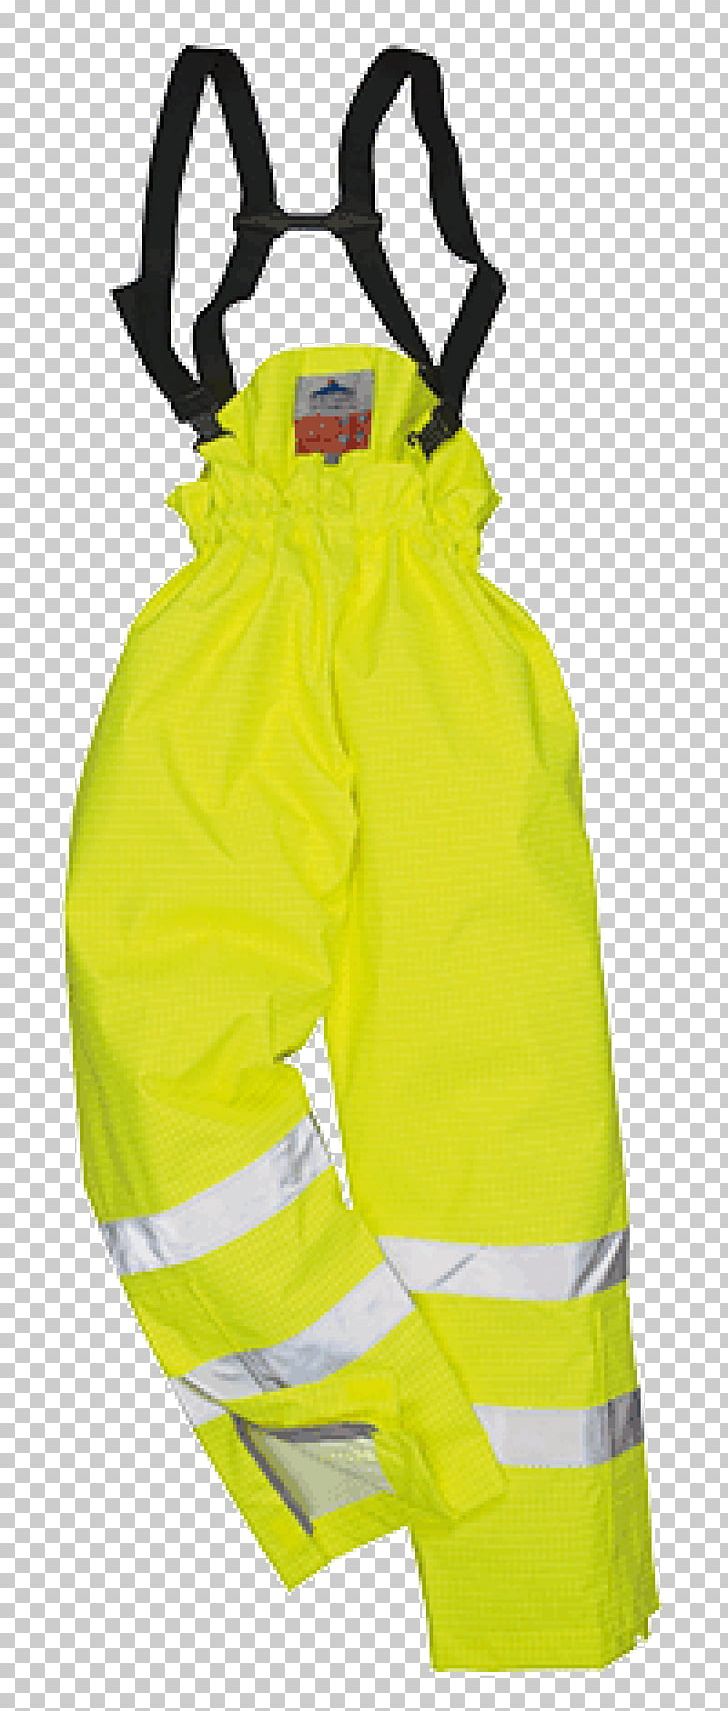 Mens Portwest Bizflame Rain Unlined High-visibility Clothing Pants Workwear PNG, Clipart, Clothing, Highvisibility Clothing, Pants, Personal Protective Equipment, Polar Fleece Free PNG Download